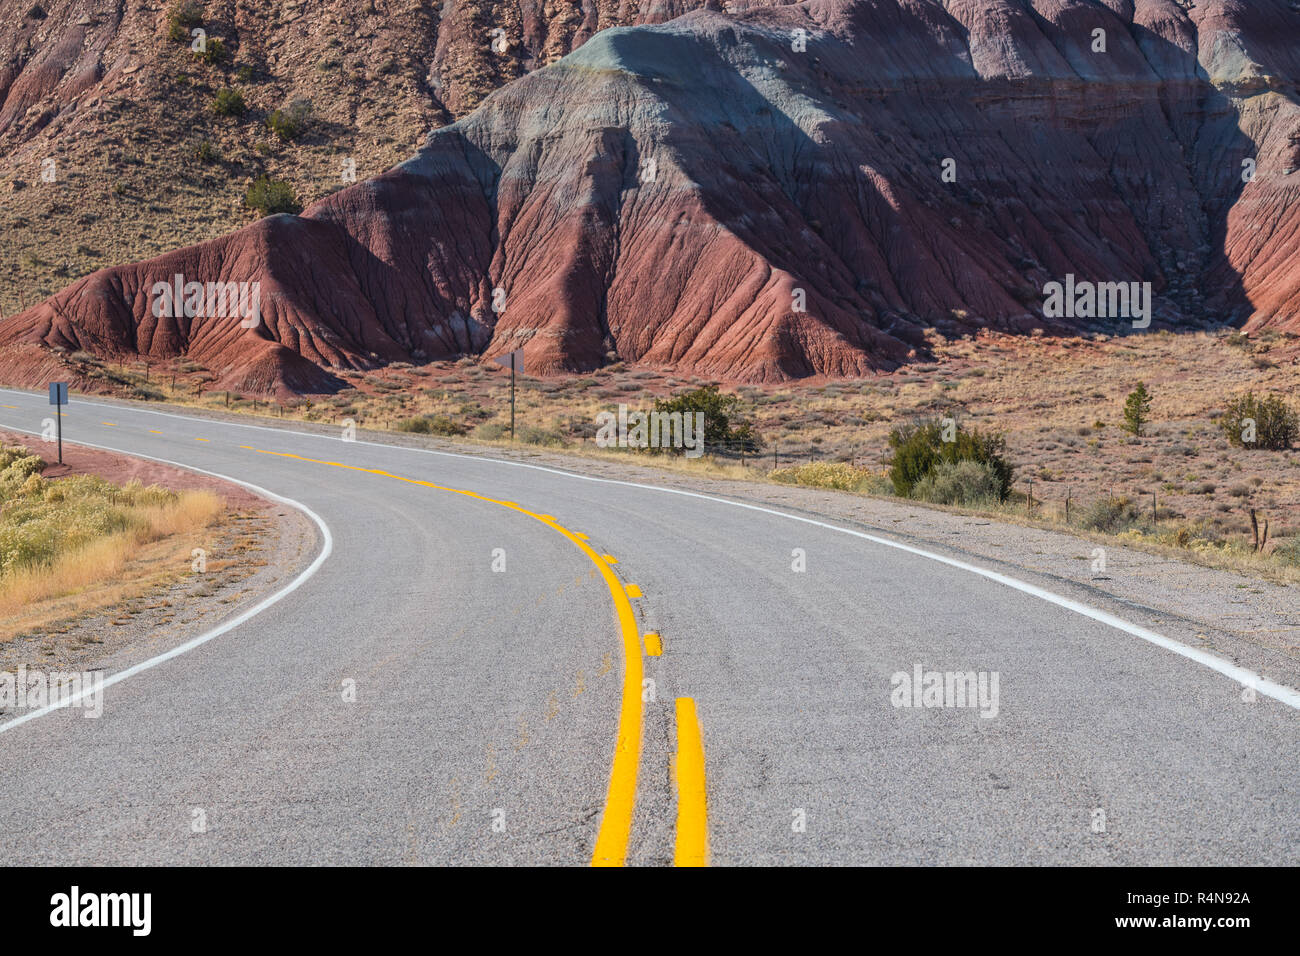 Curving road leading into a colorful desert landscape near Abiquiu, New Mexico in the American Southwest Stock Photo